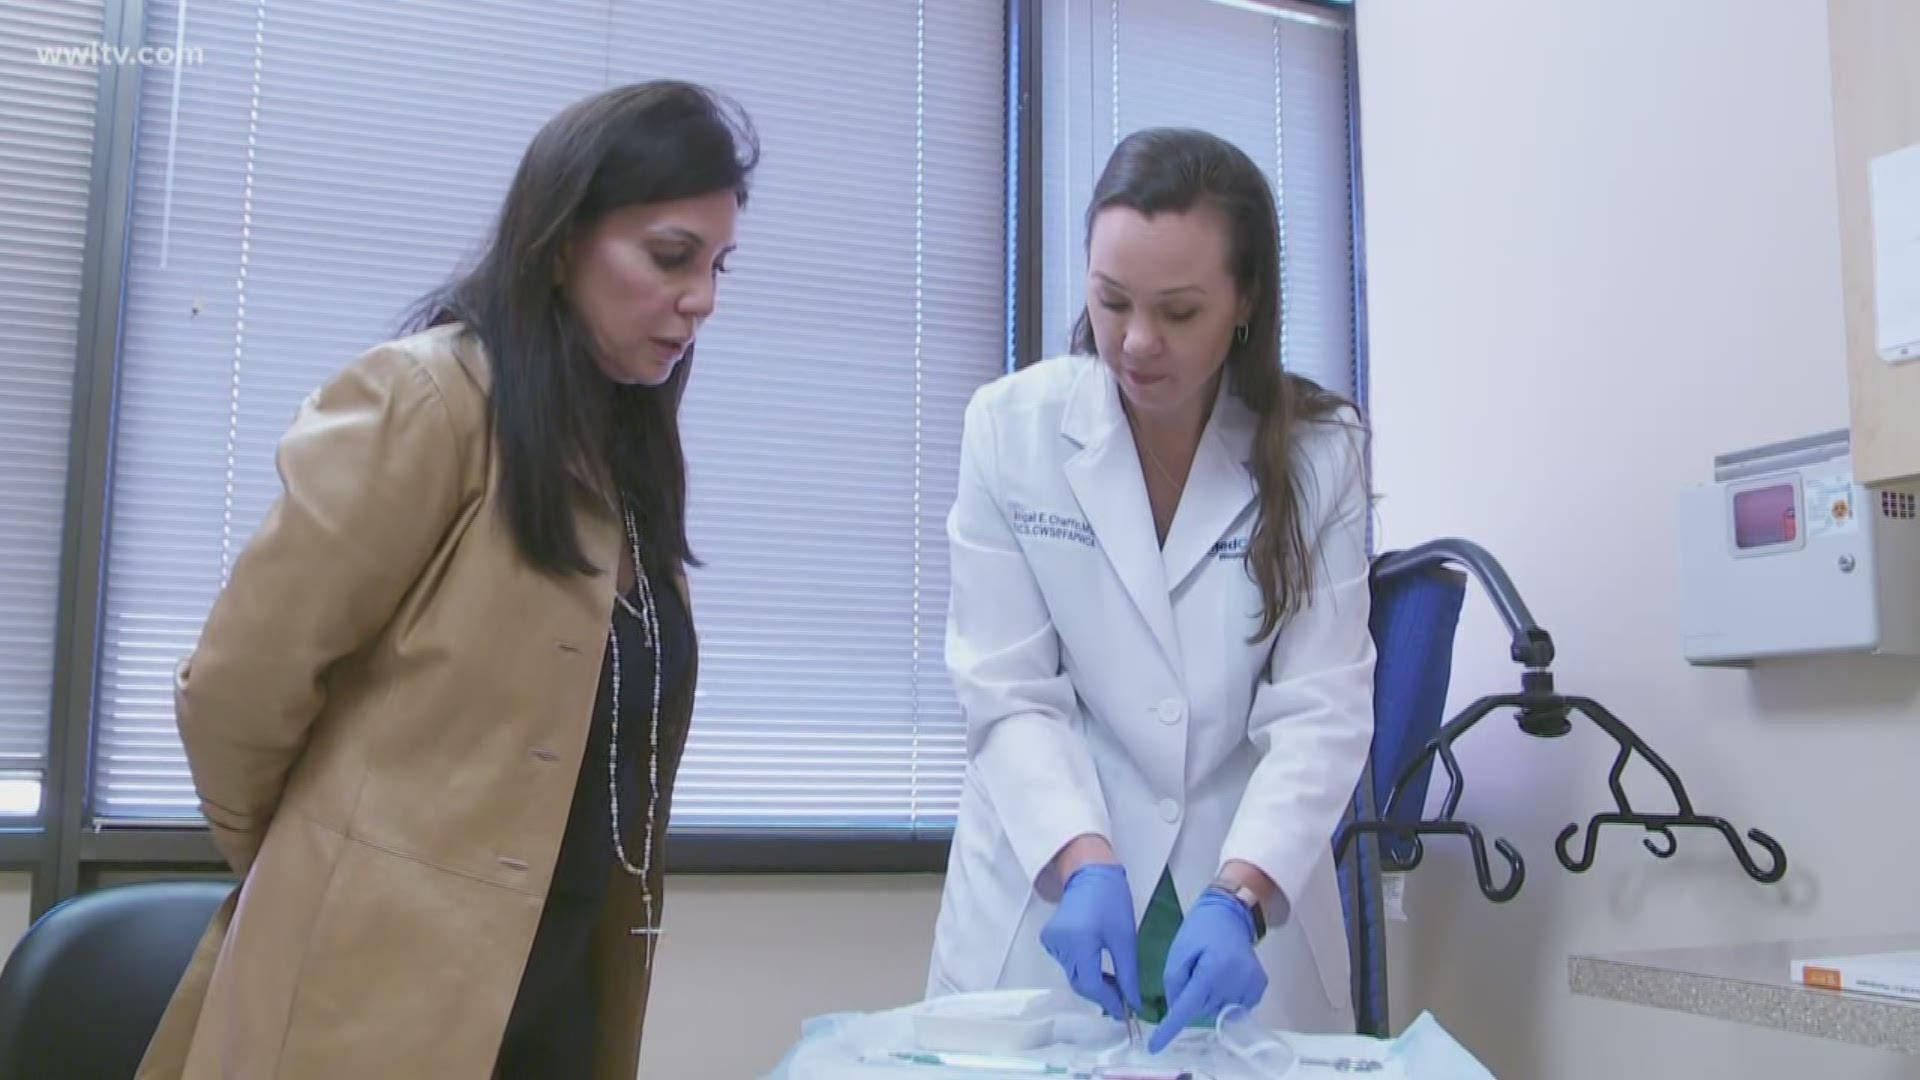 Living tissue from donated placentas is helping patients regenerate skin faster.